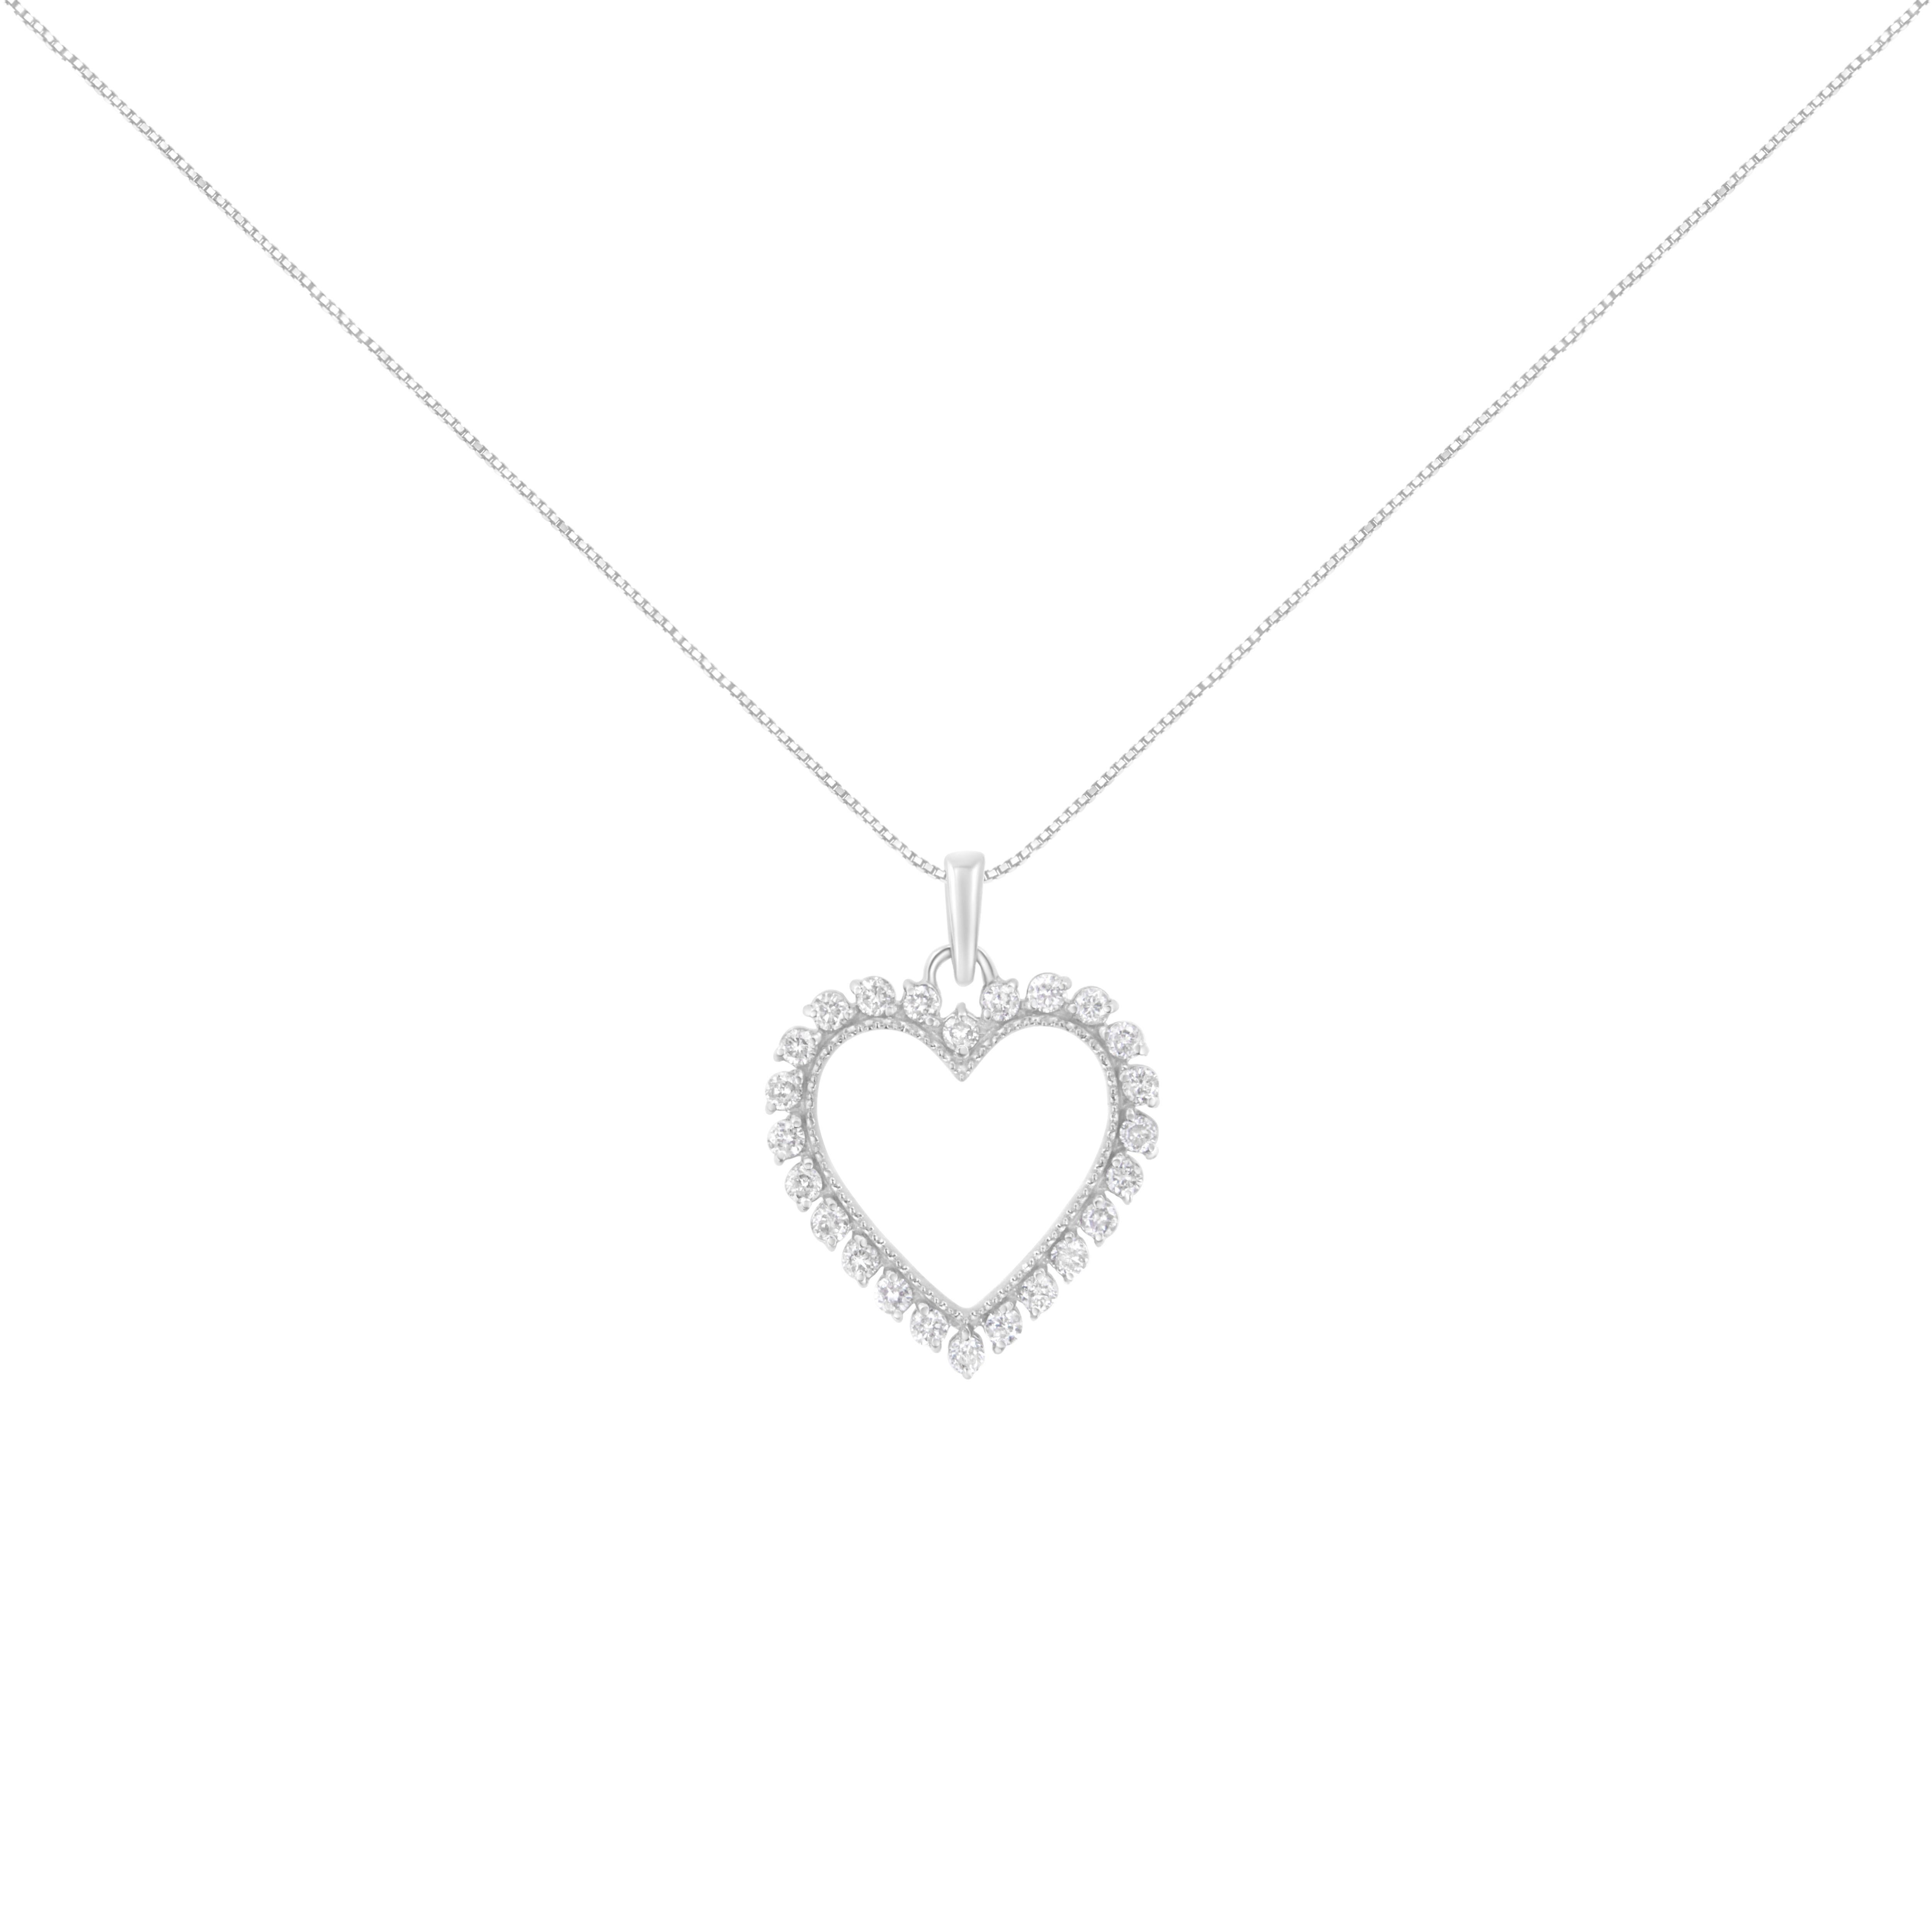 This open heart pendant is a shining symbol of love. Fashioned in cool sterling silver, this pendant showcases 1/2ct TDW of diamonds. 24 glistening round cut diamonds in prong setting sit along the outside edge of this heart design. The pendant